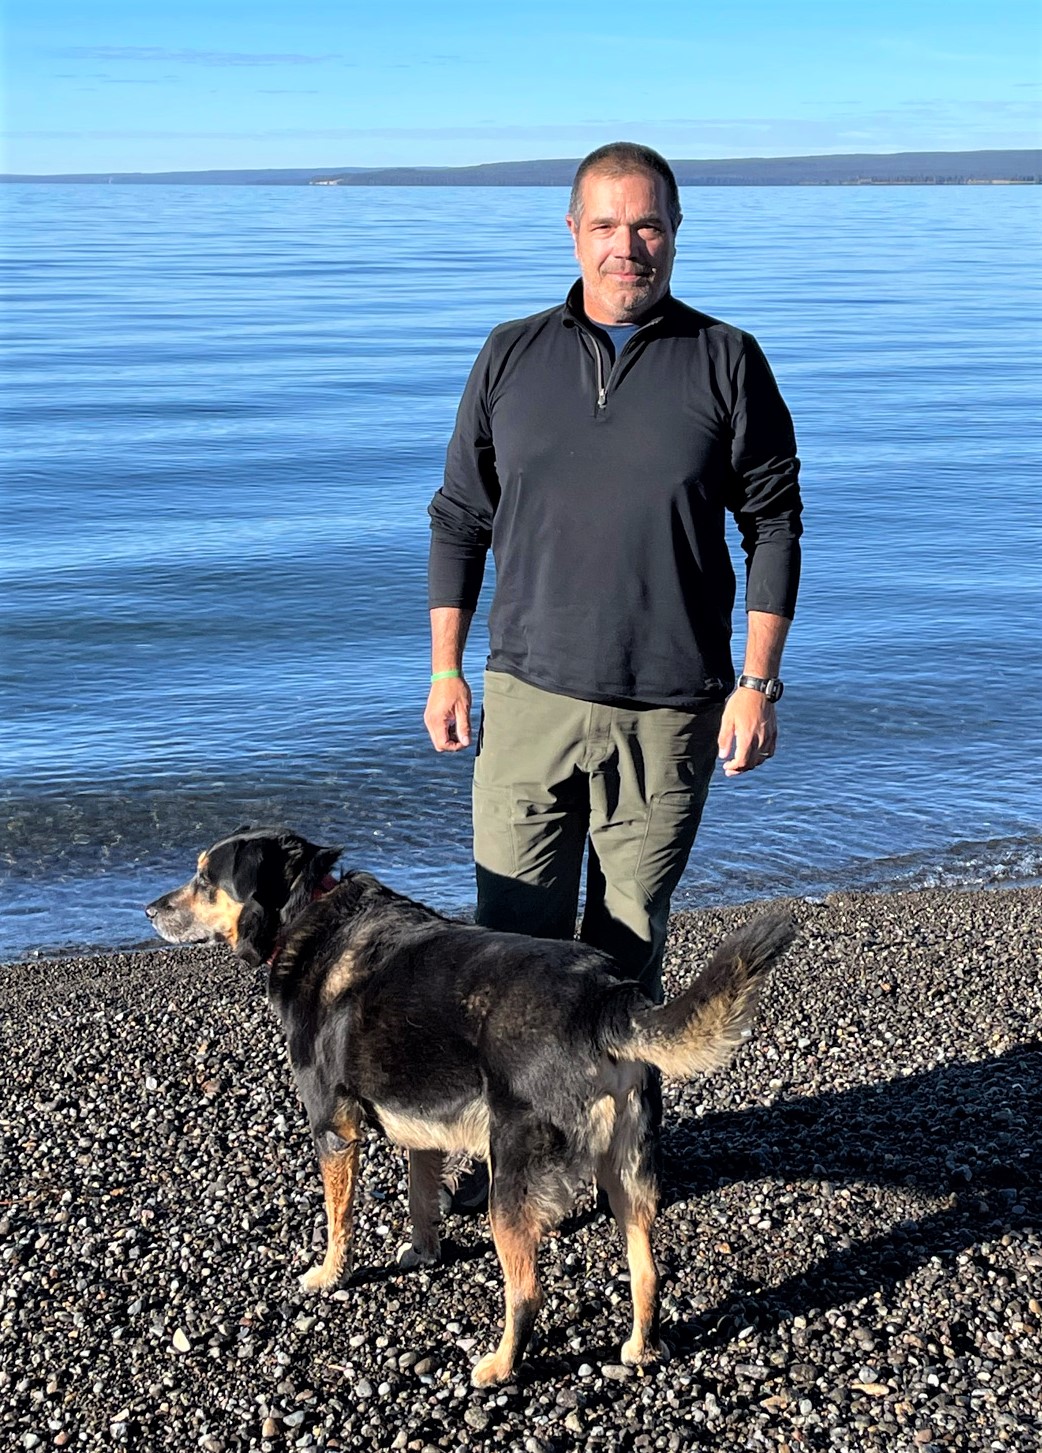 Man and dog by a lake in Yellowstone National Park